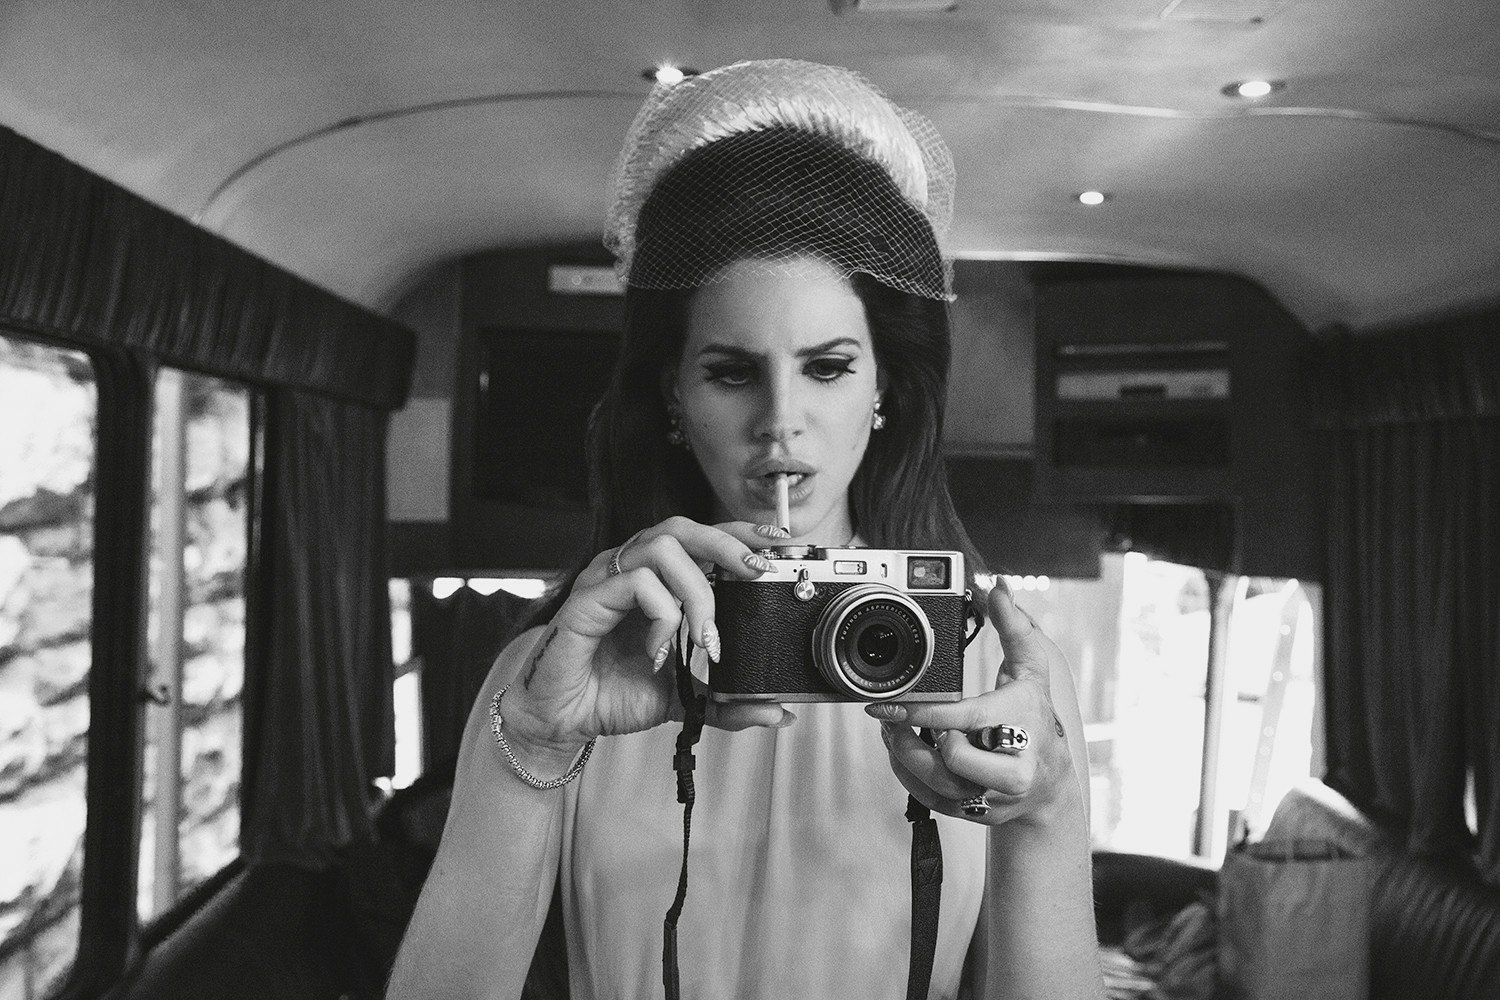 124 Lana Del Rey Hd Wallpapers Background Images